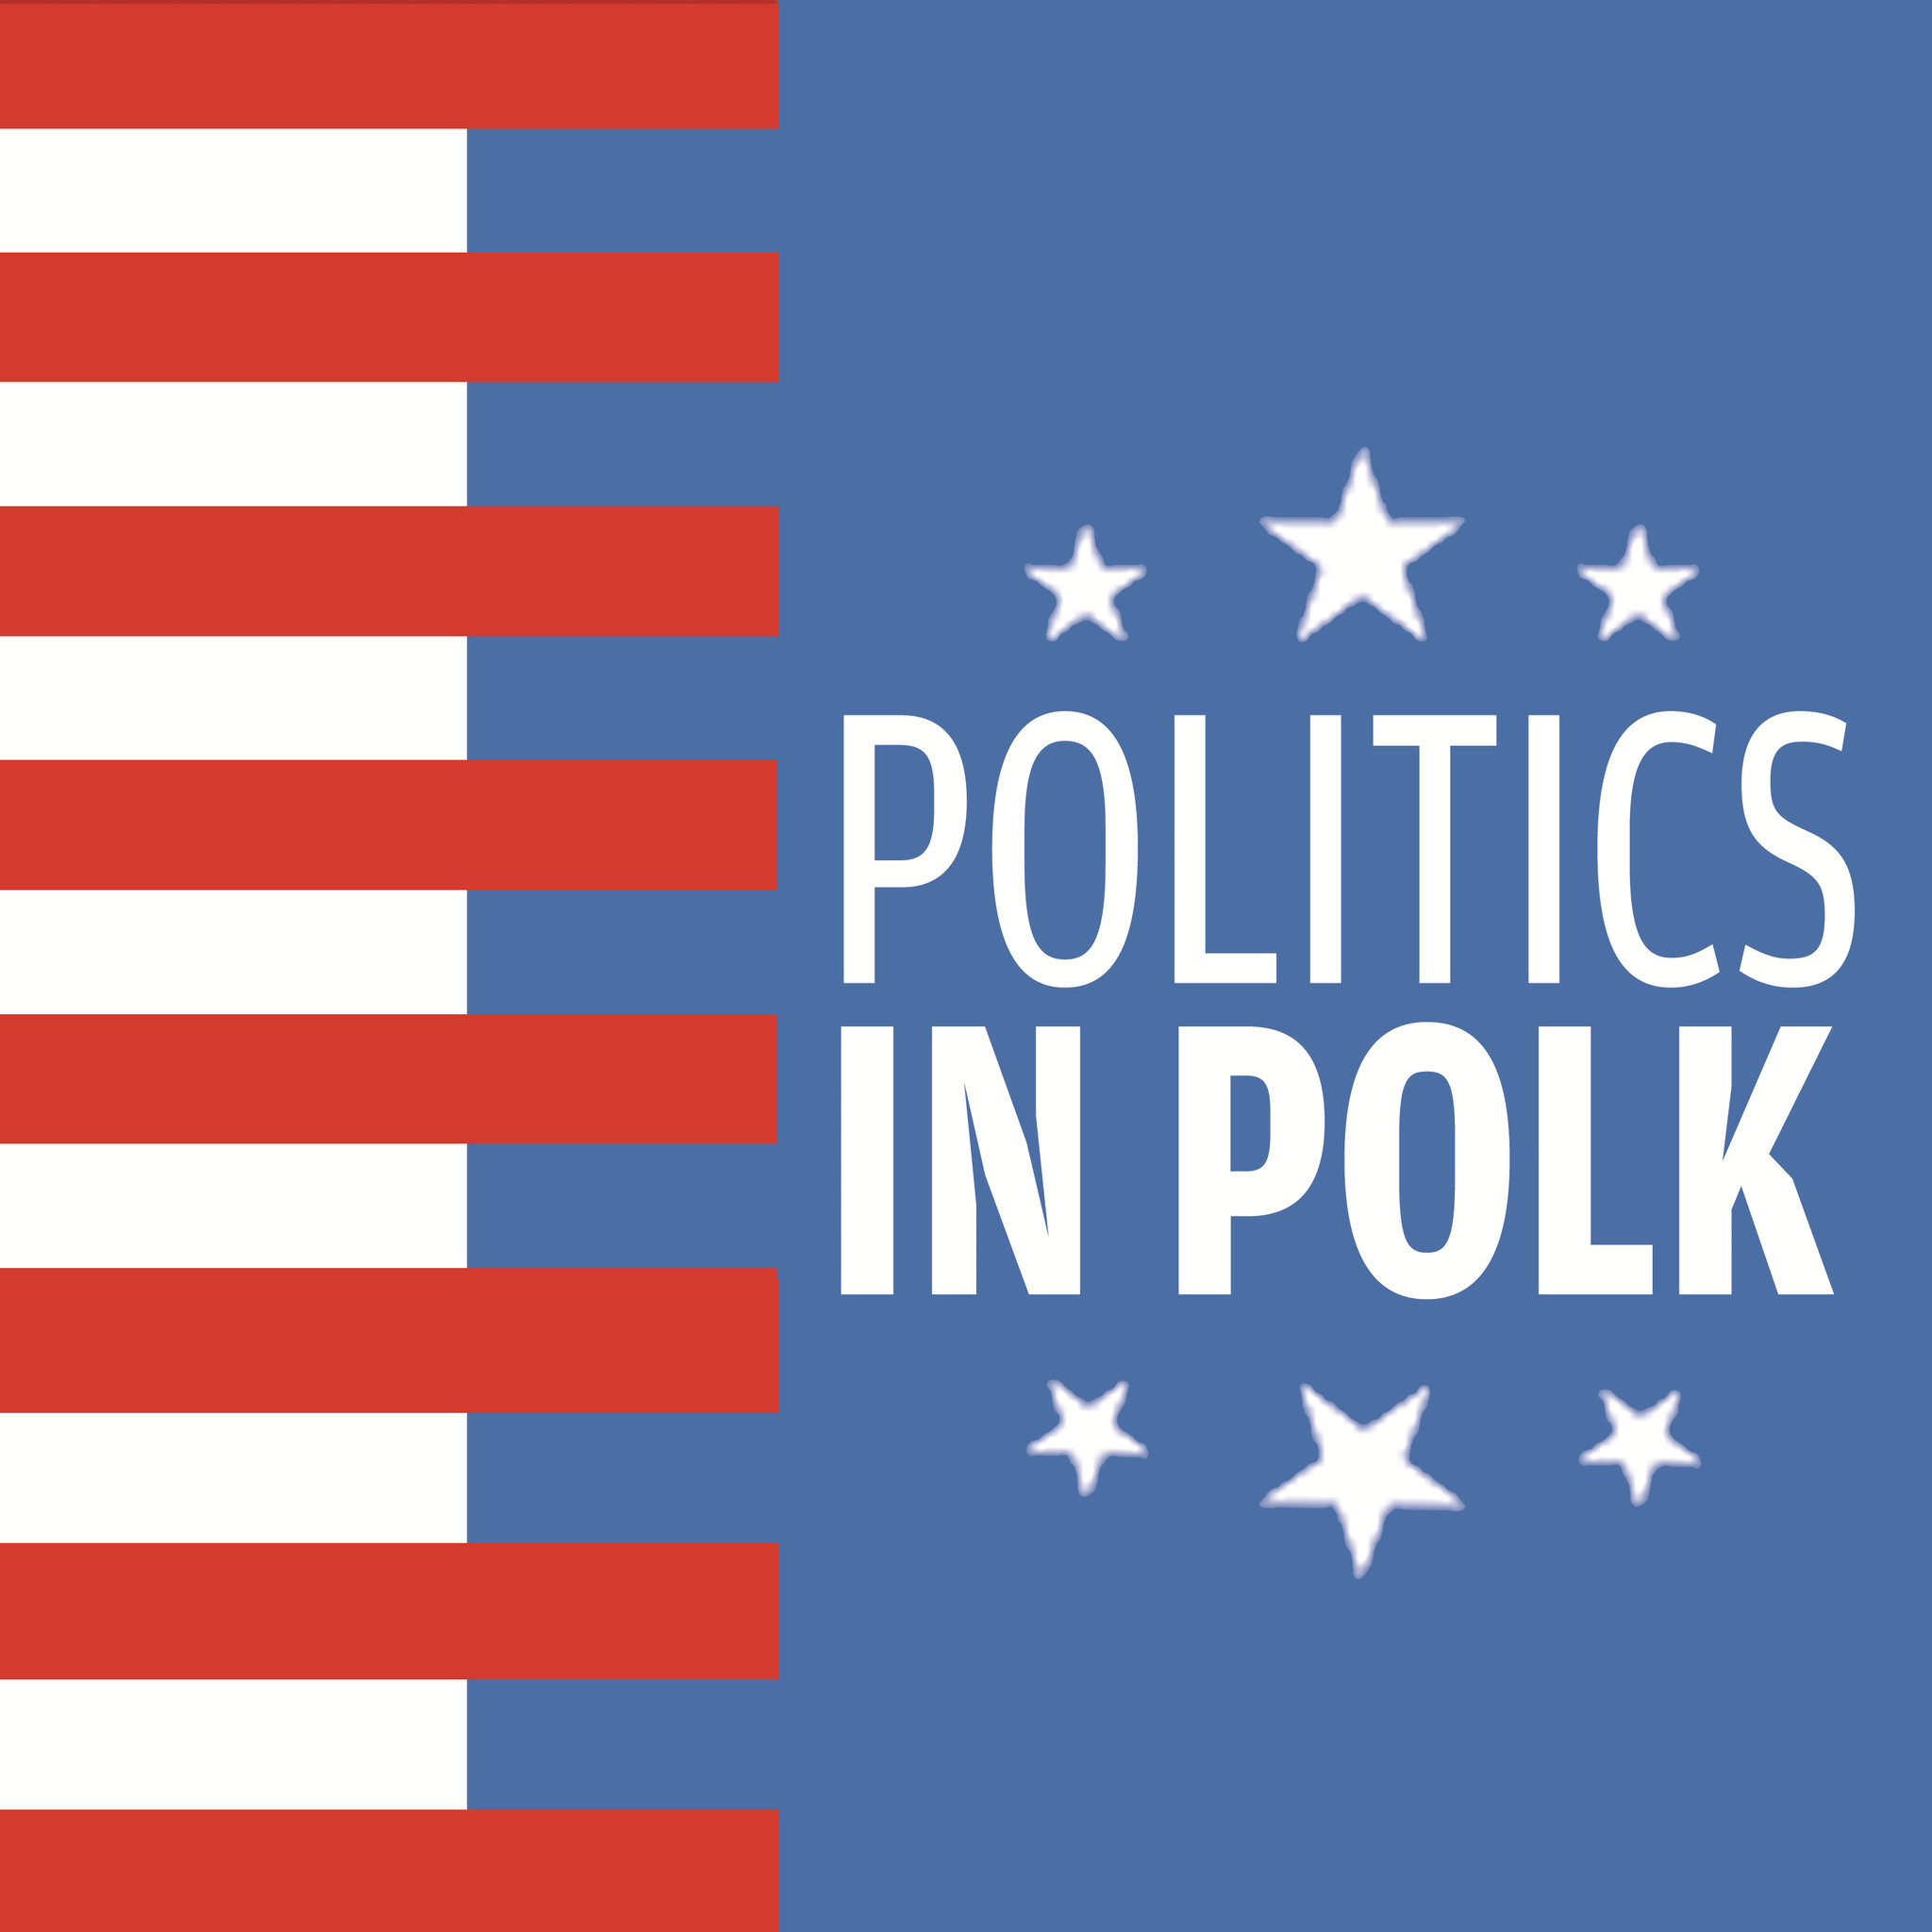 Politics in Polk: Four fresh commissioners heading to the Lakeland City Commission